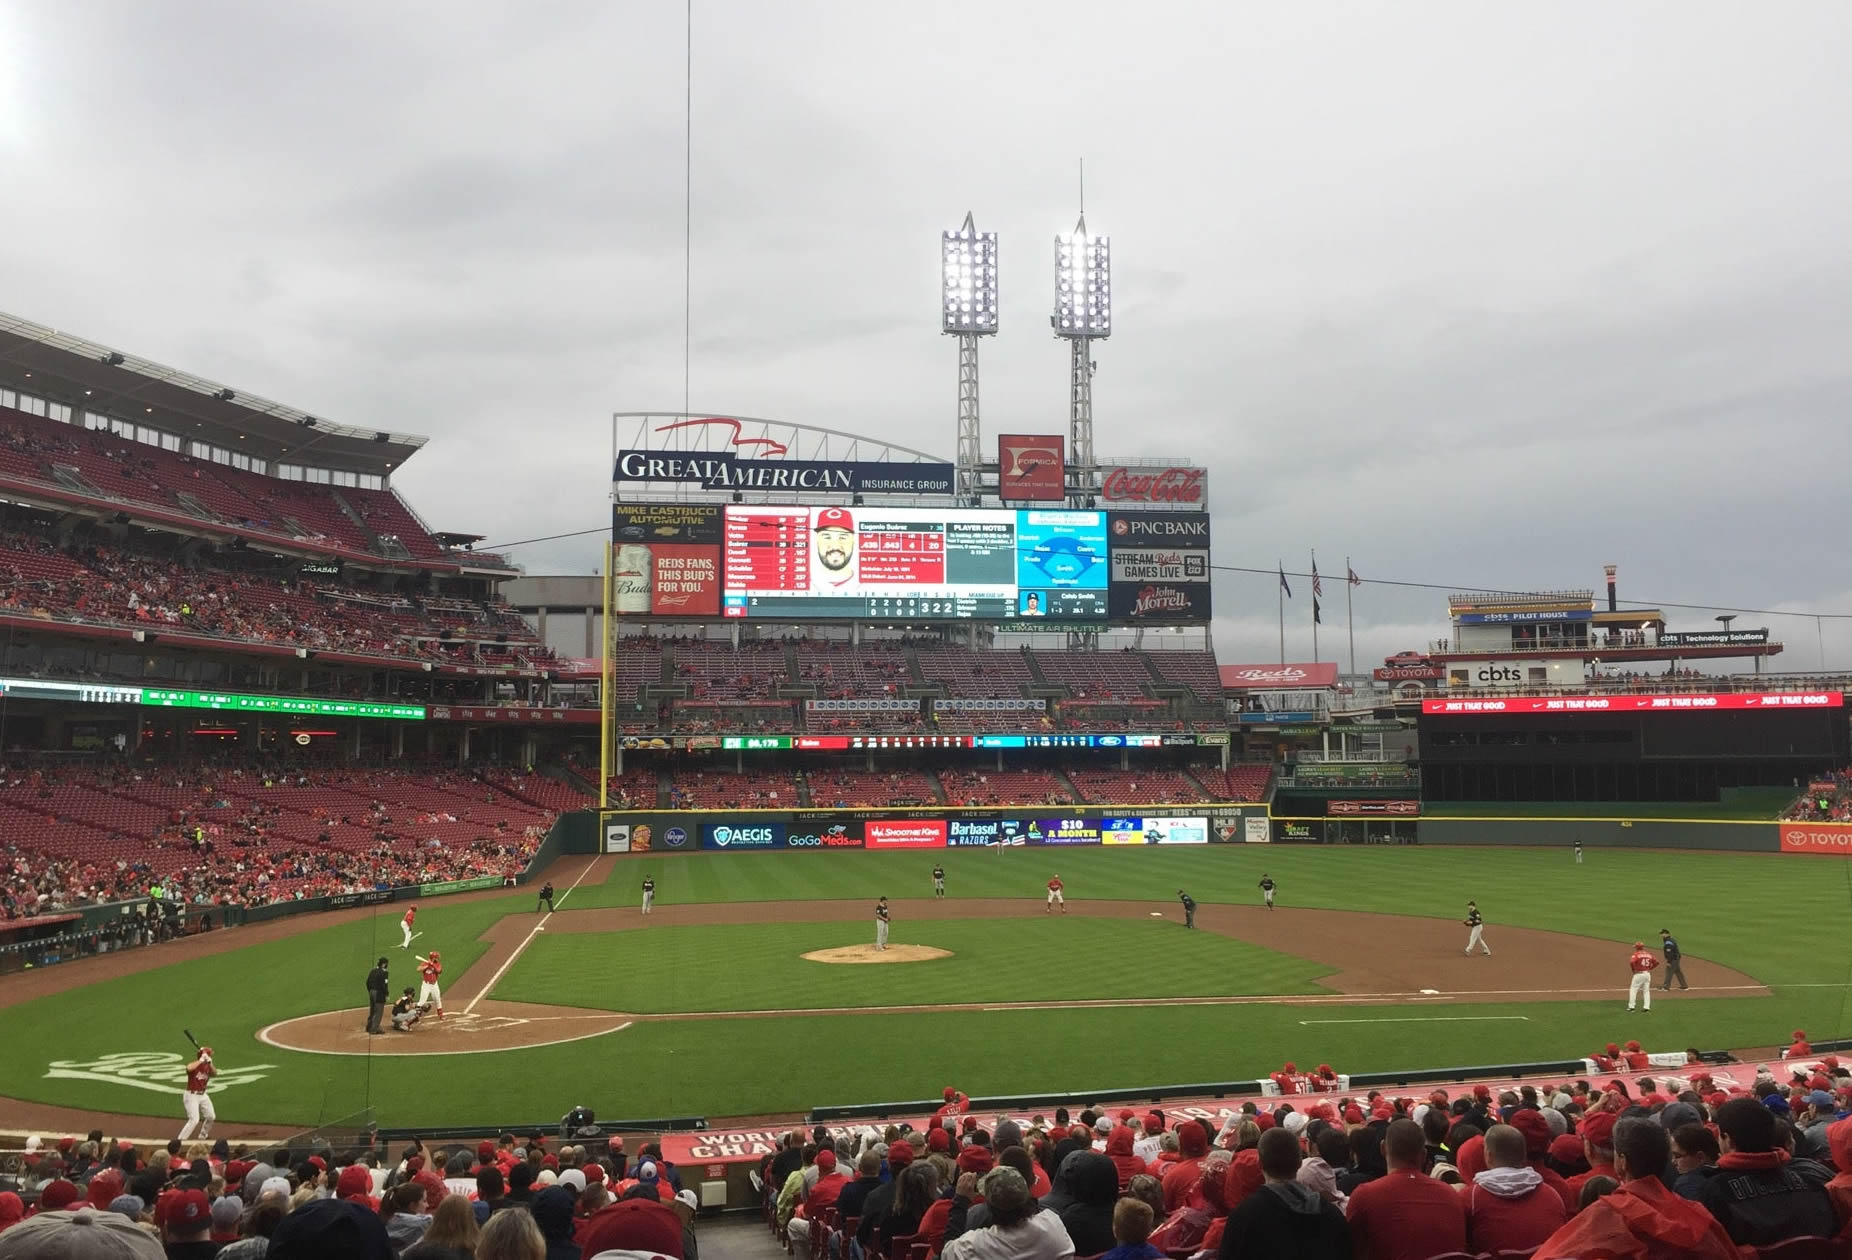 Section 127 at Great American Ball Park 